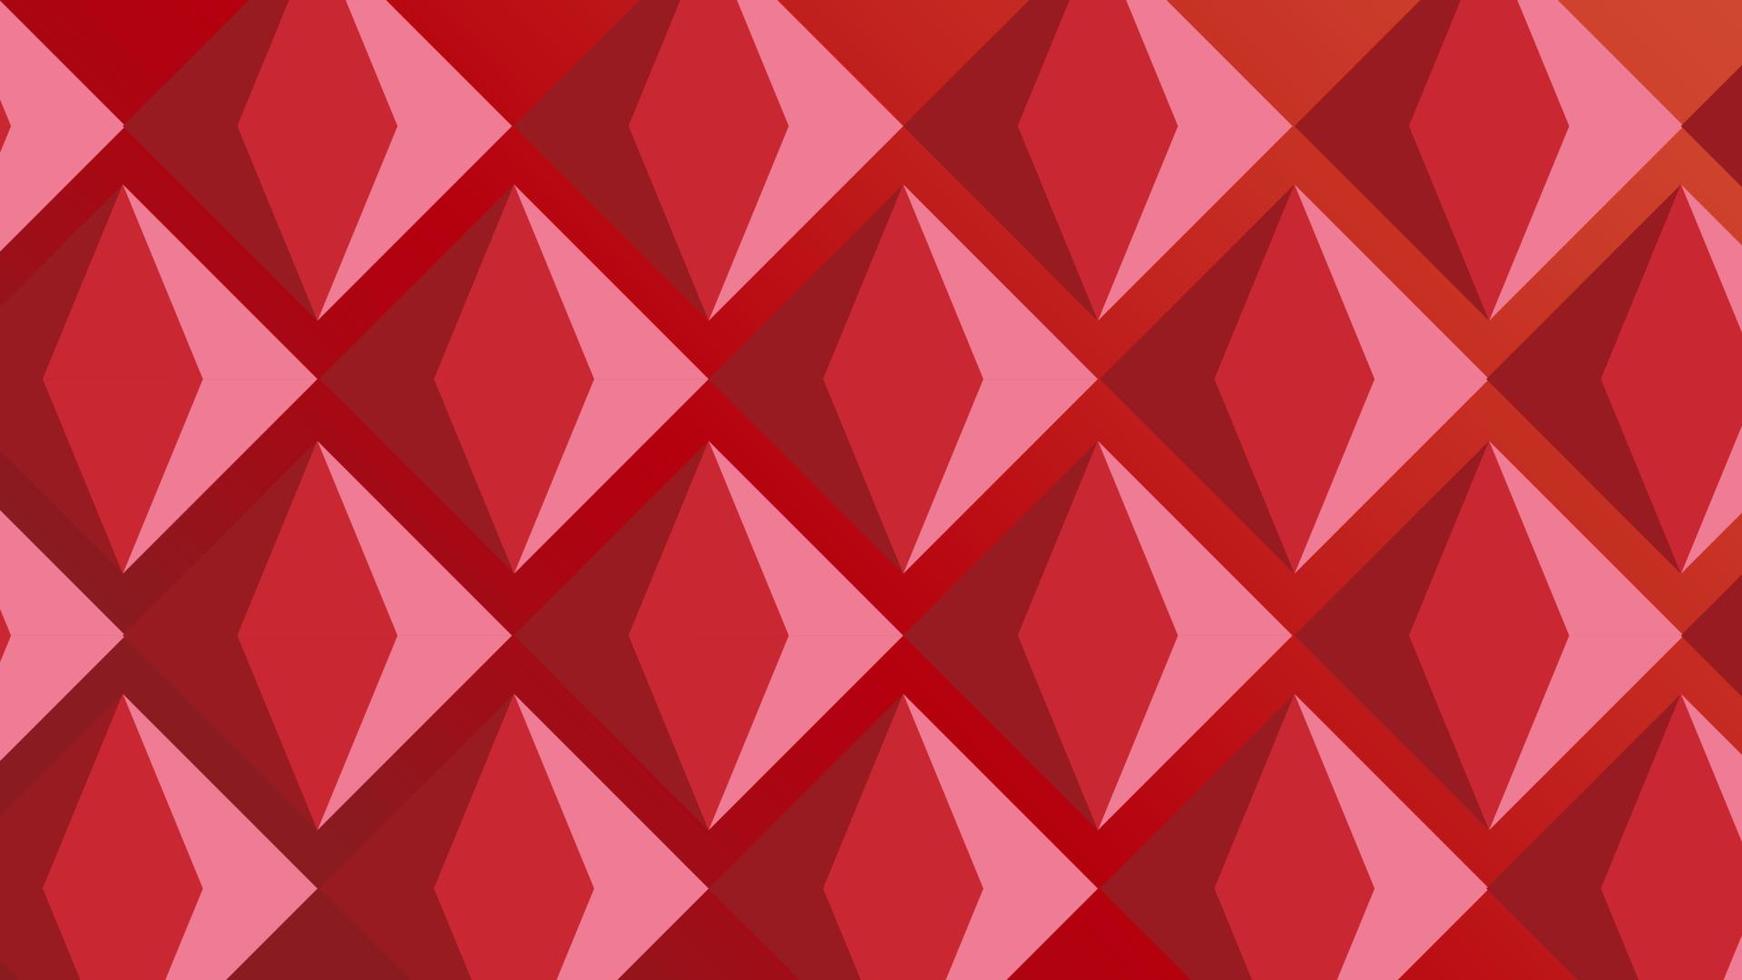 Abstract red color background. Dynamic shapes composition. Eps10 vector